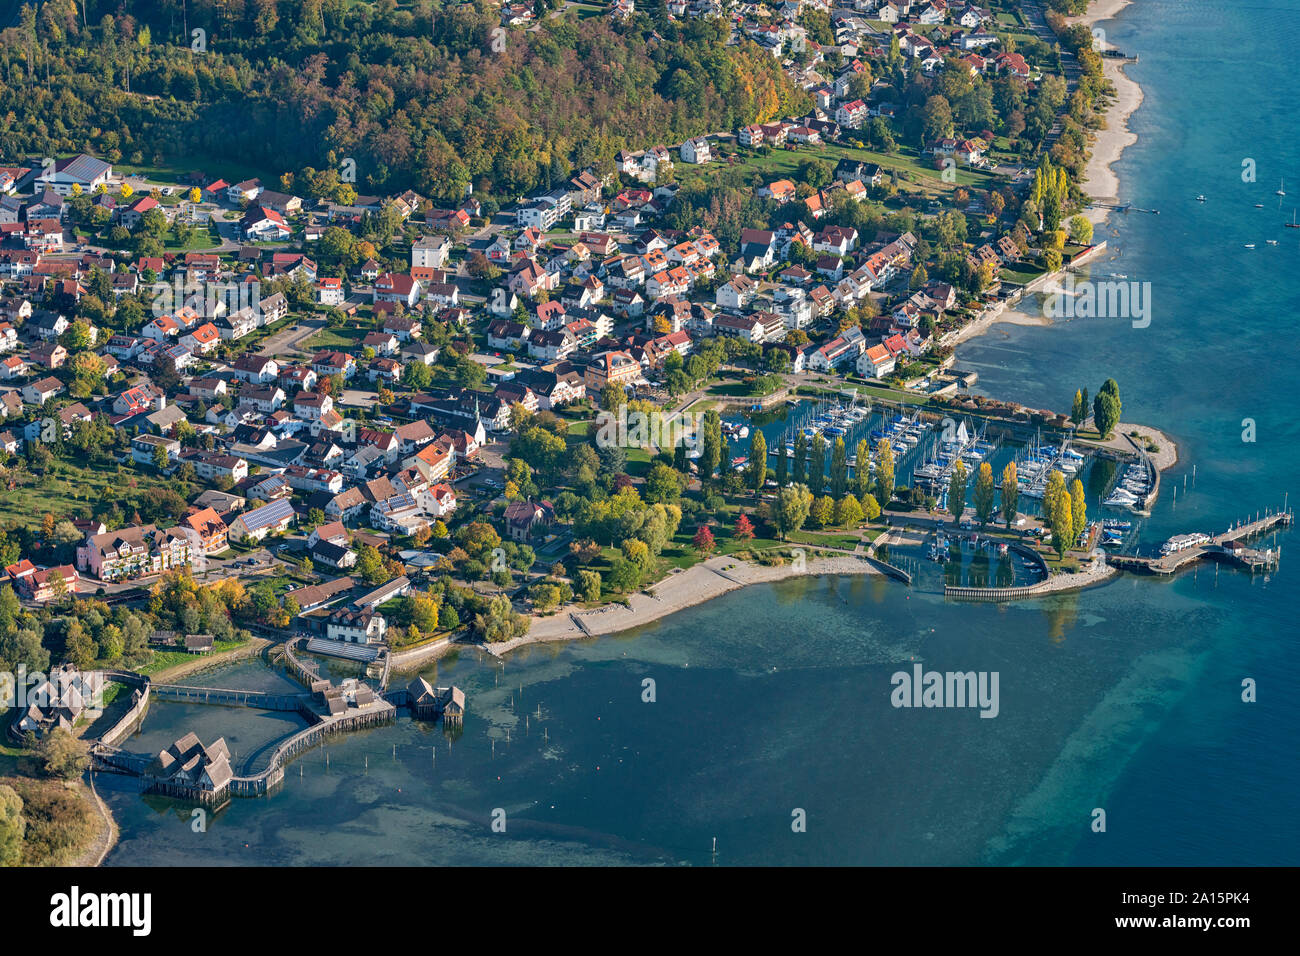 Germany, Baden-Wurttemberg, Aerial view of stilt houses and town on Lake Constance Stock Photo